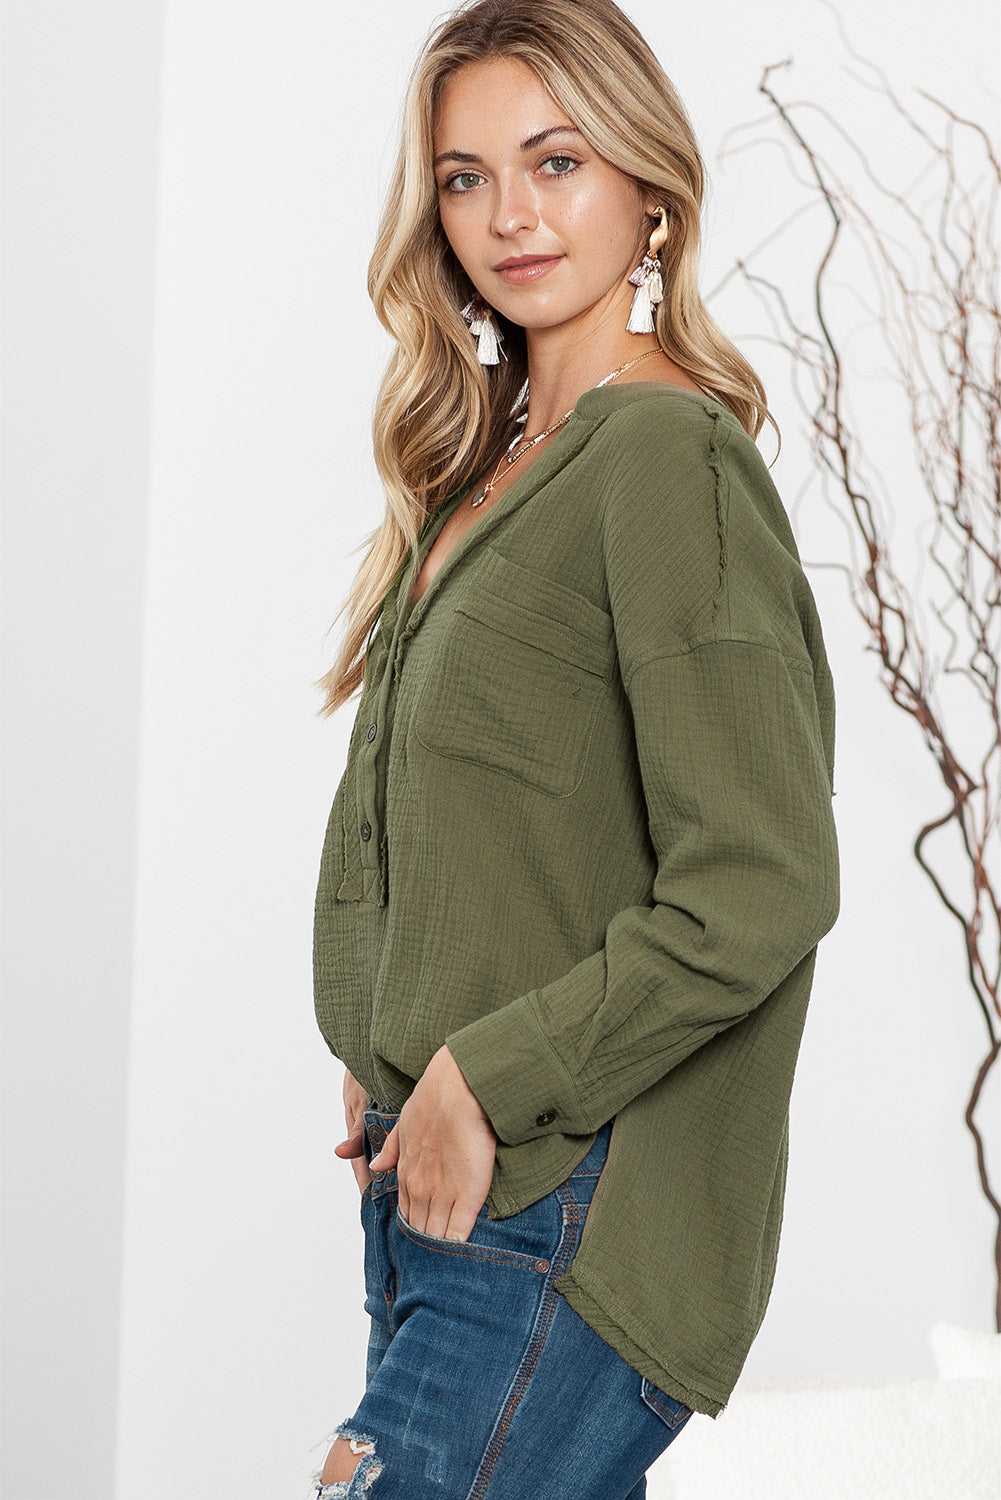 Green Gauze Buttoned V Neck Long Sleeve Shirt with Pockets